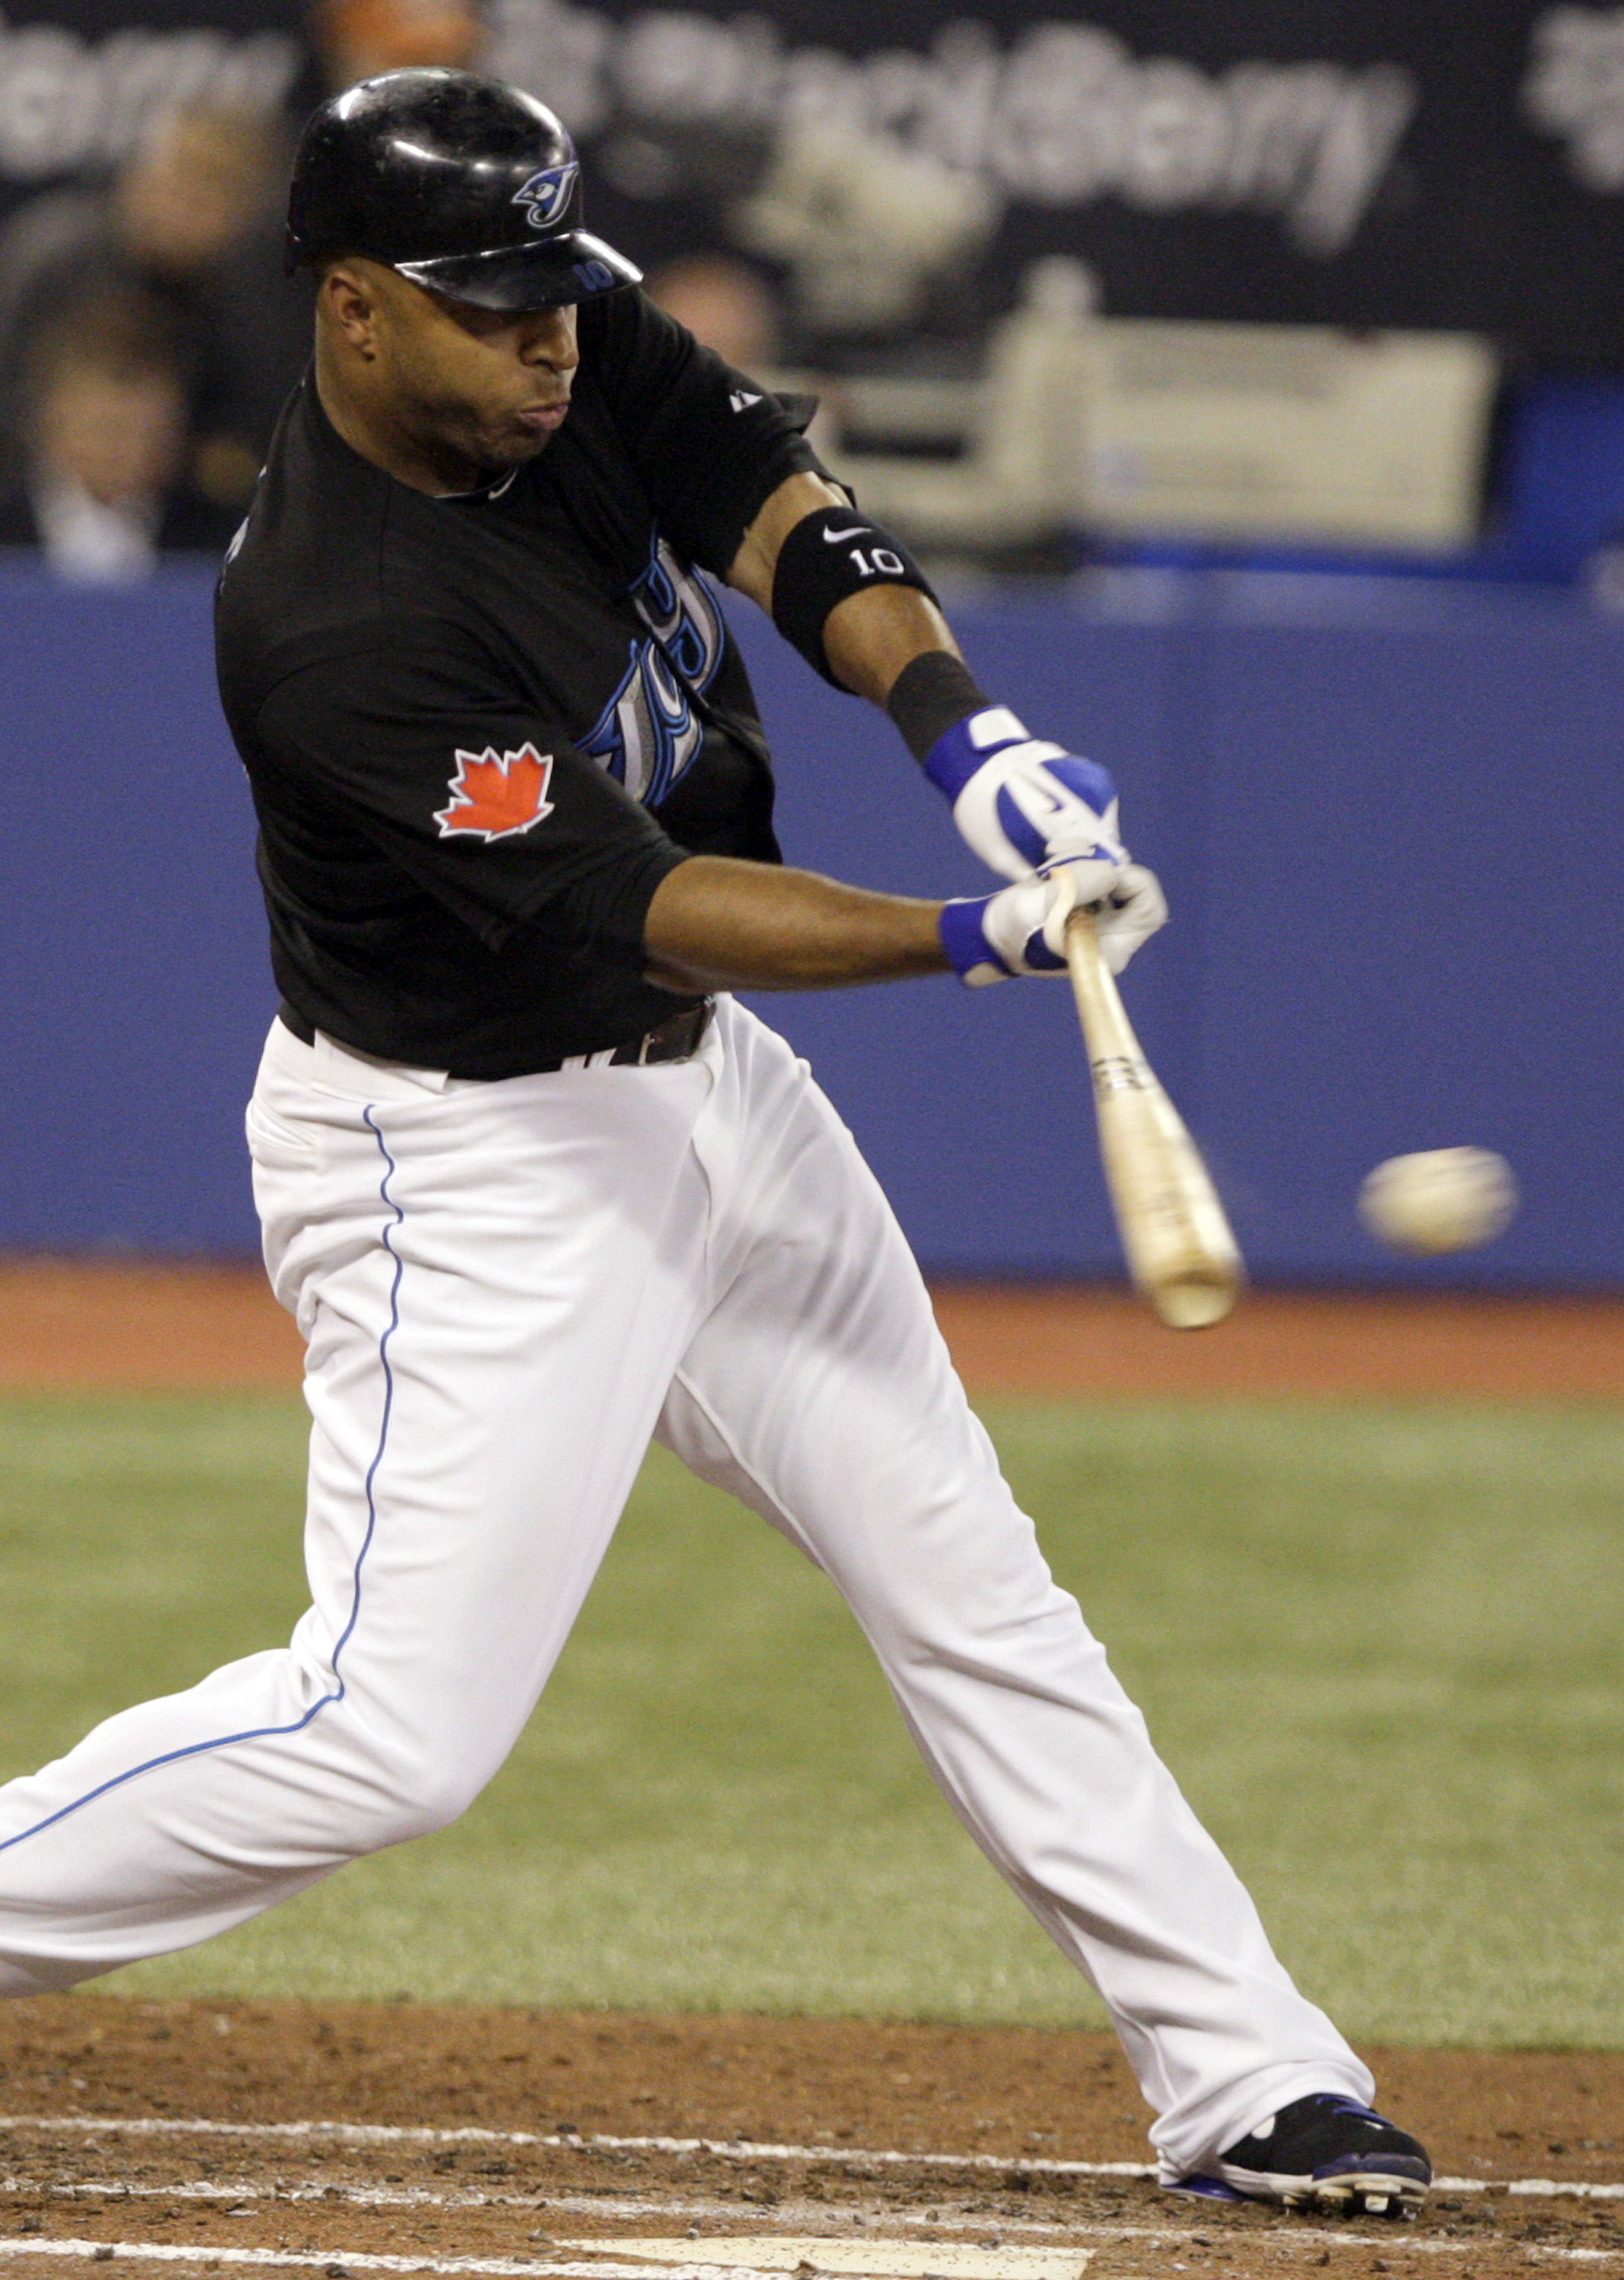 TORONTO, ON - SEPTEMBER 29: Vernon Wells #10 of the Toronto Blue Jays hits against the New York Yankees during a MLB game at the Rogers Centre September 29, 2010 in Toronto, Ontario, Canada. (Photo by Abelimages/Getty Images)